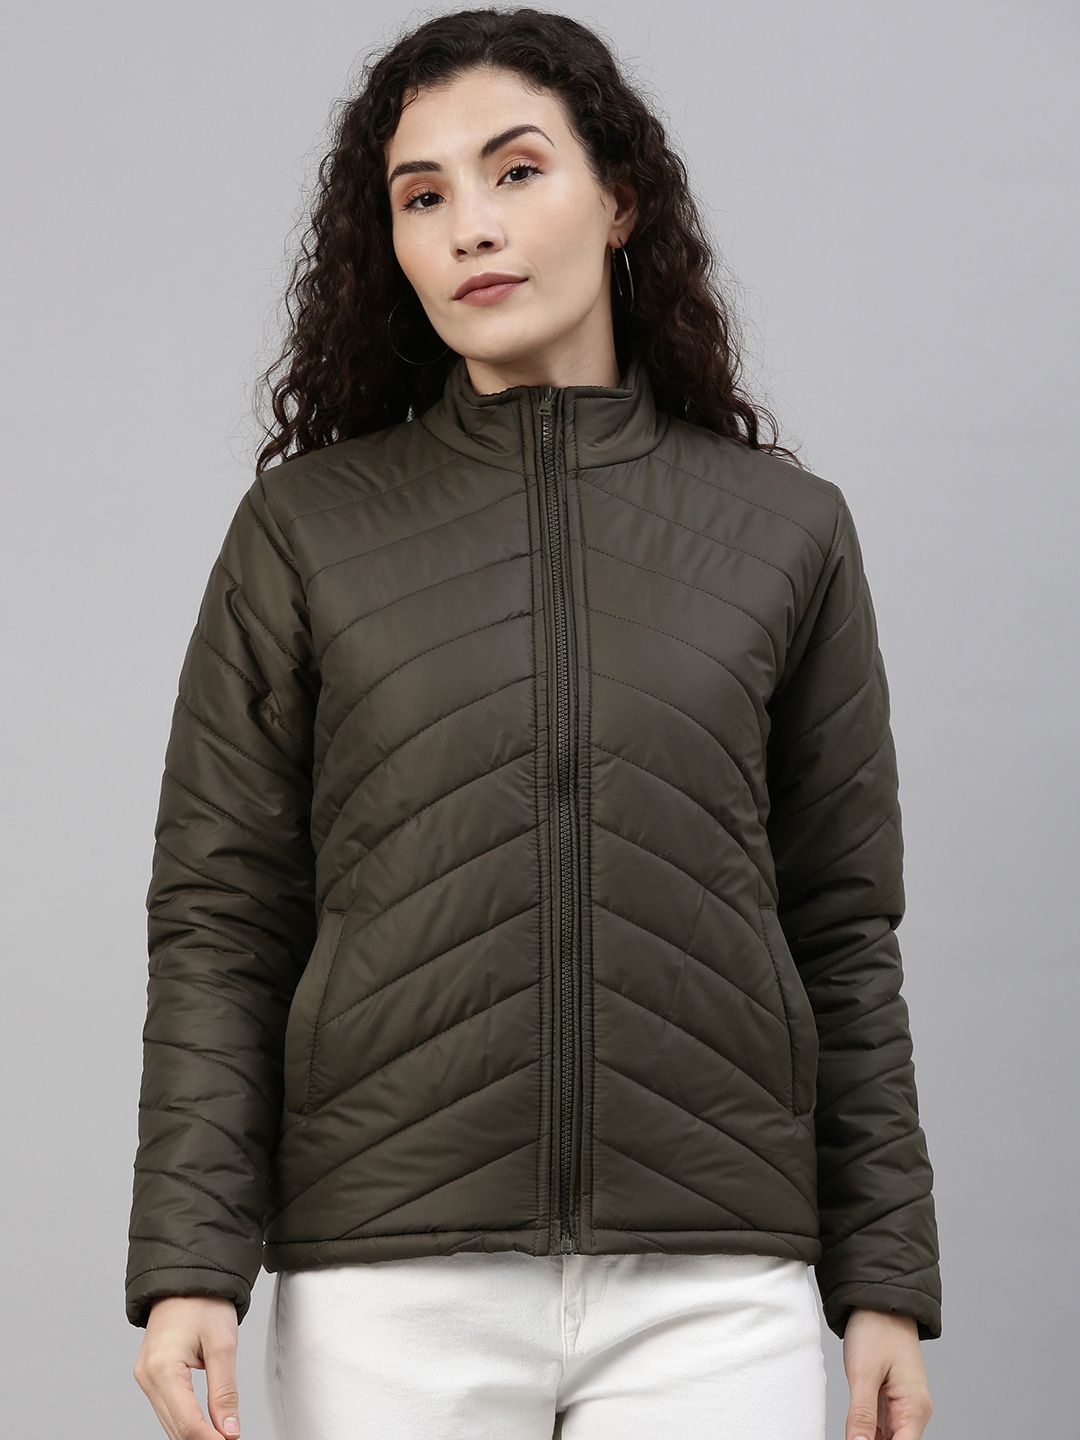 Campus Sutra Women Green Windcheater Outdoor Padded Jacket Price in India